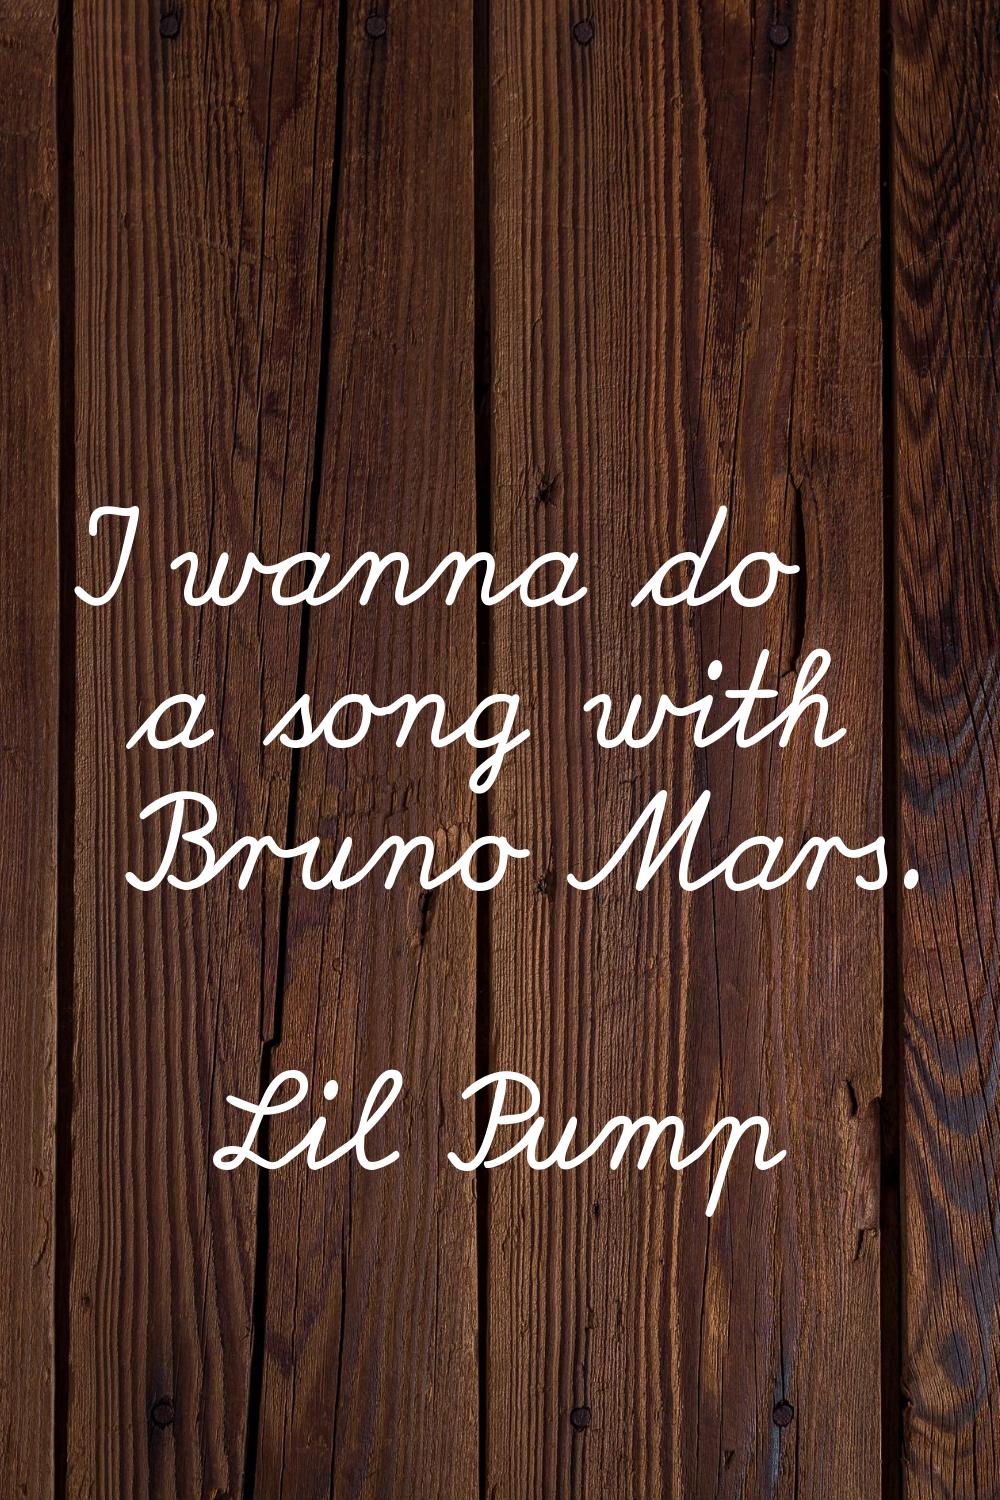 I wanna do a song with Bruno Mars.